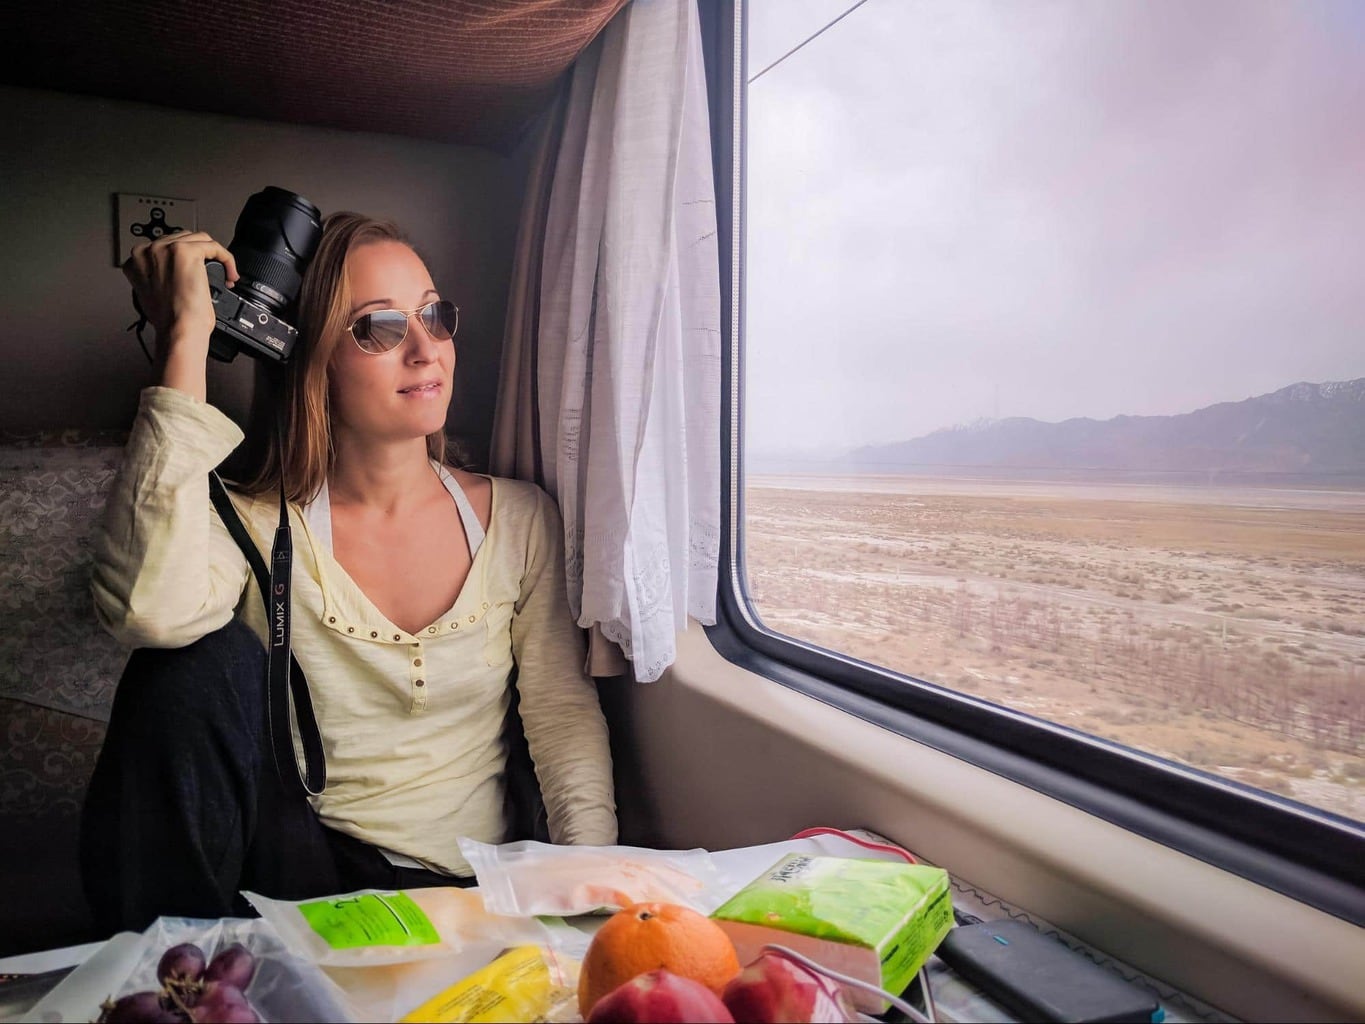 The train to Lhasa